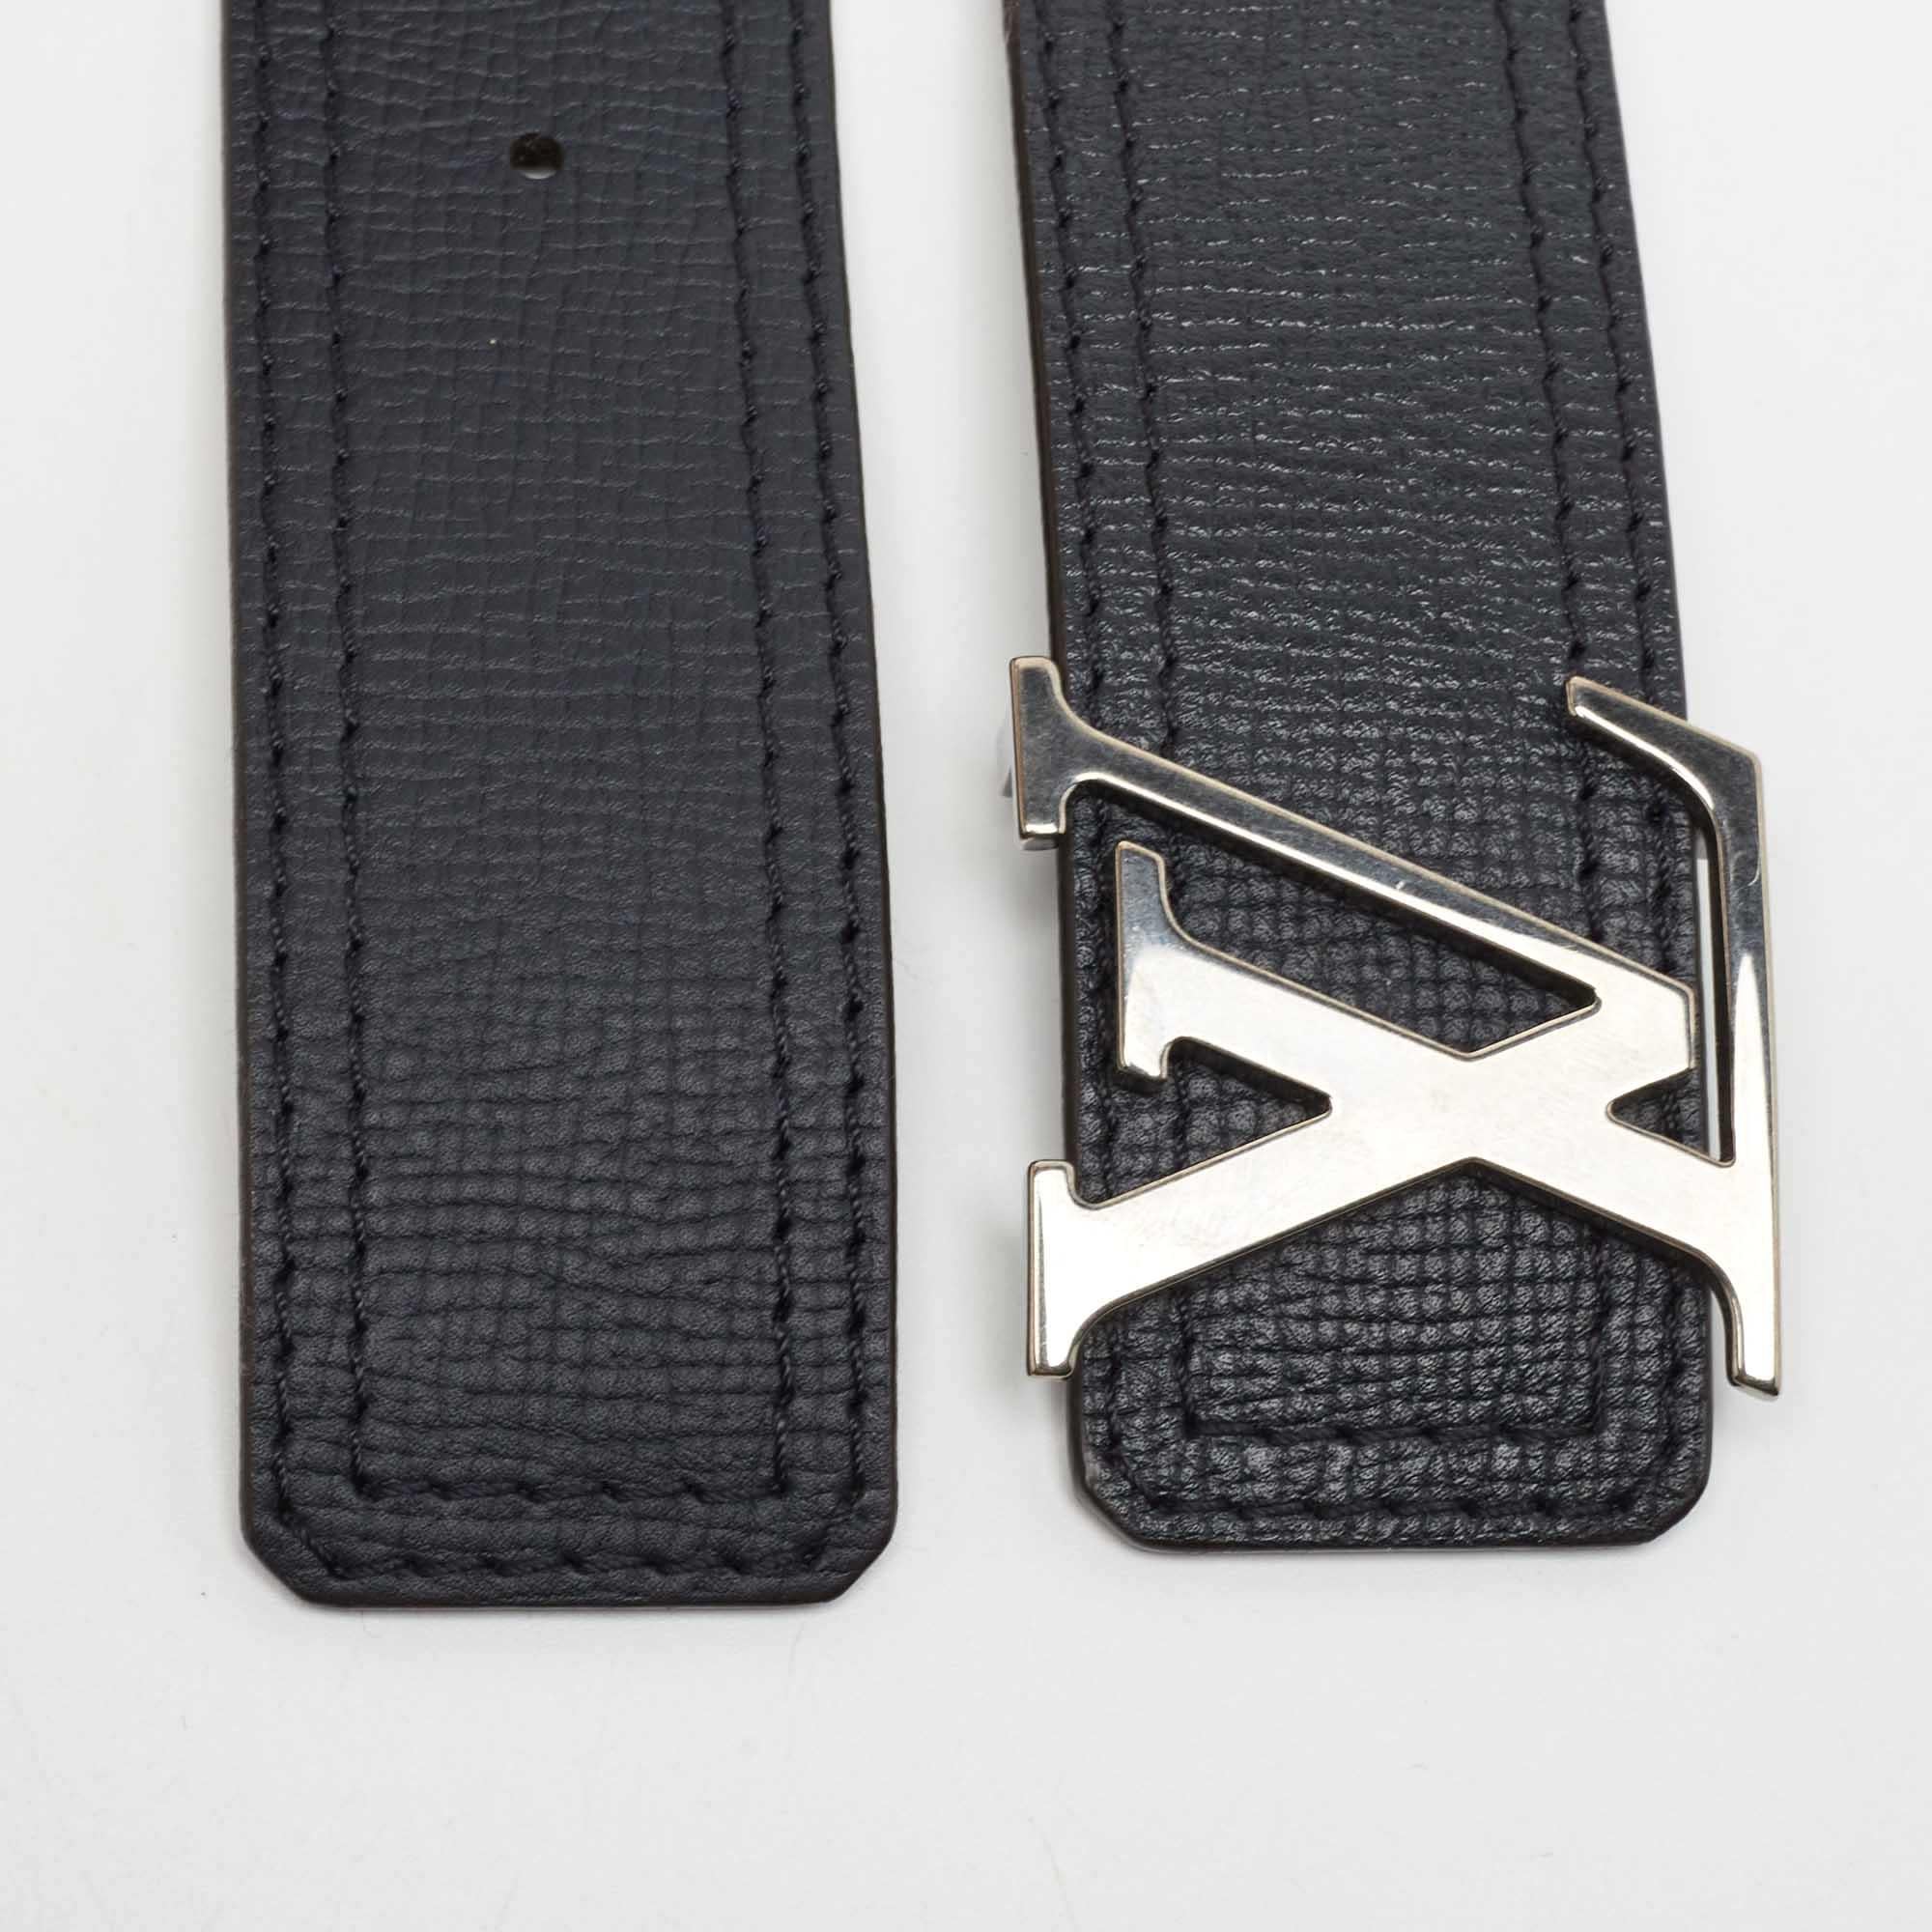 Experience the high-functionality and fine quality of luxurious accessories as you wear this belt designed by Louis Vuitton. It is crafted with black leather and showcases the LV Initiales logo on the buckle.

Includes: Original Dustbag

